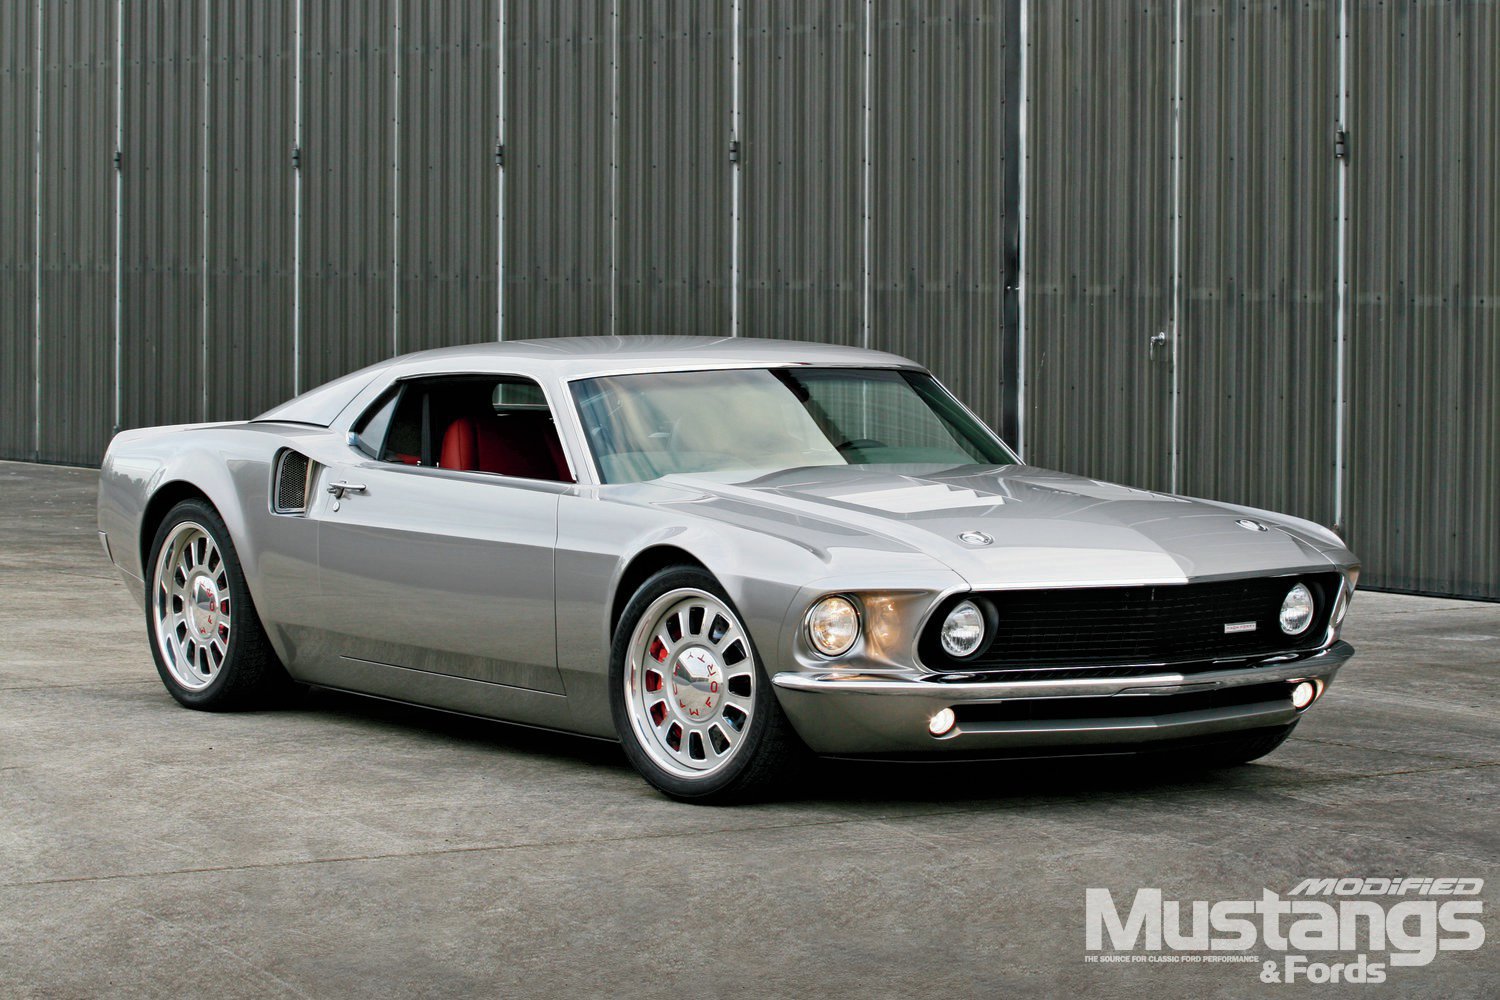 Ford Mustang Mach I #5